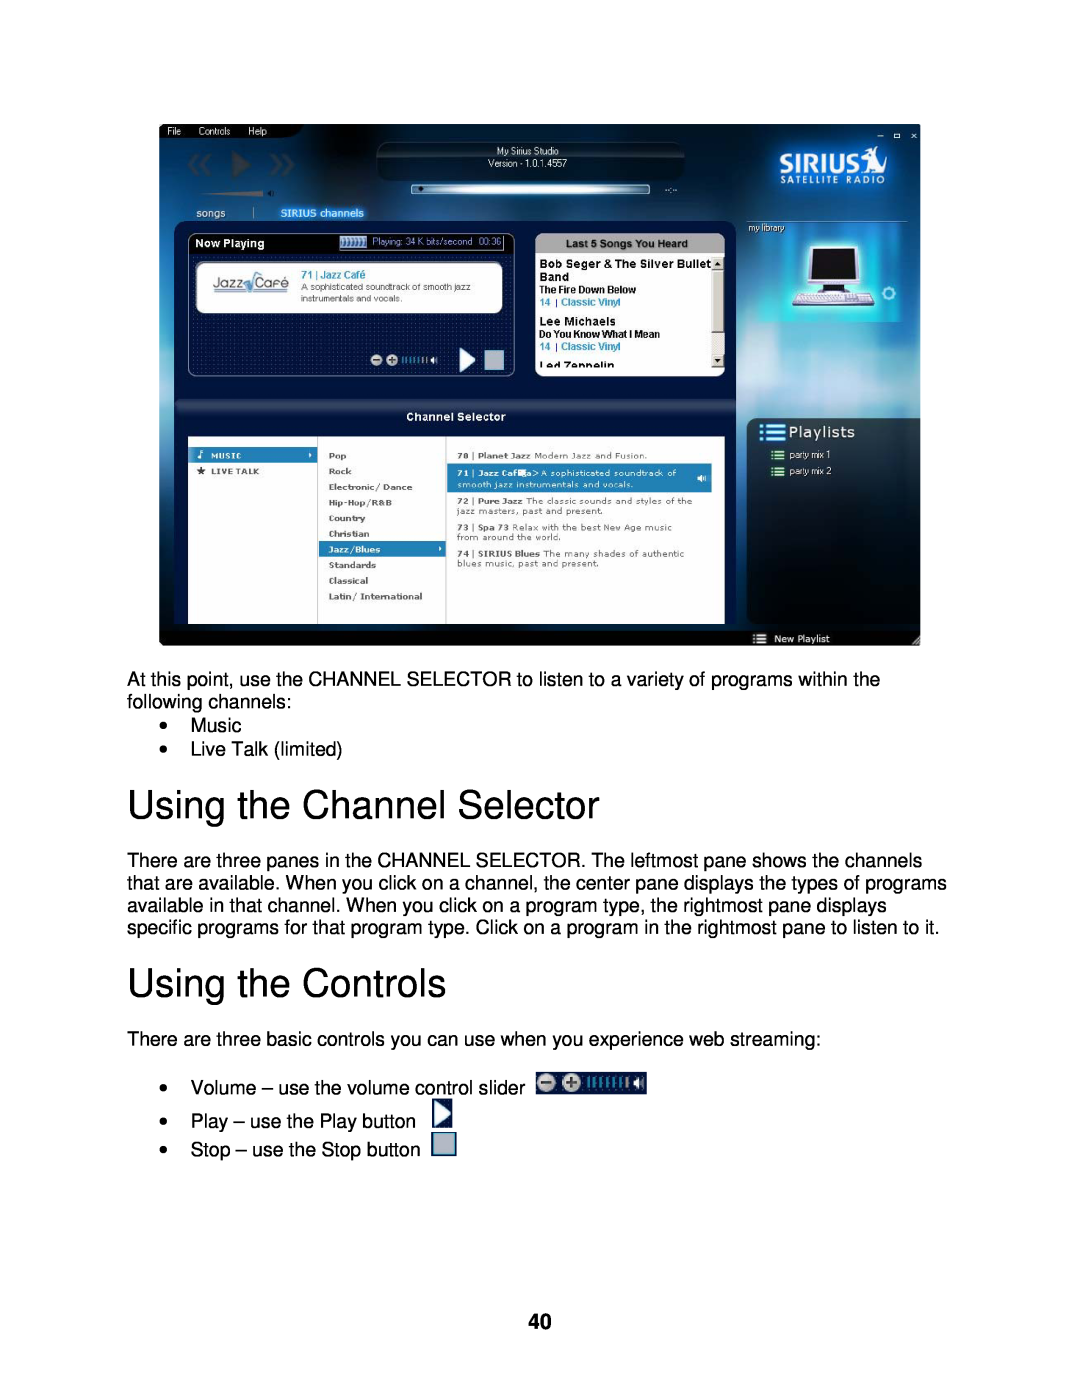 Sirius Satellite Radio 100 manual Using the Channel Selector, Using the Controls 